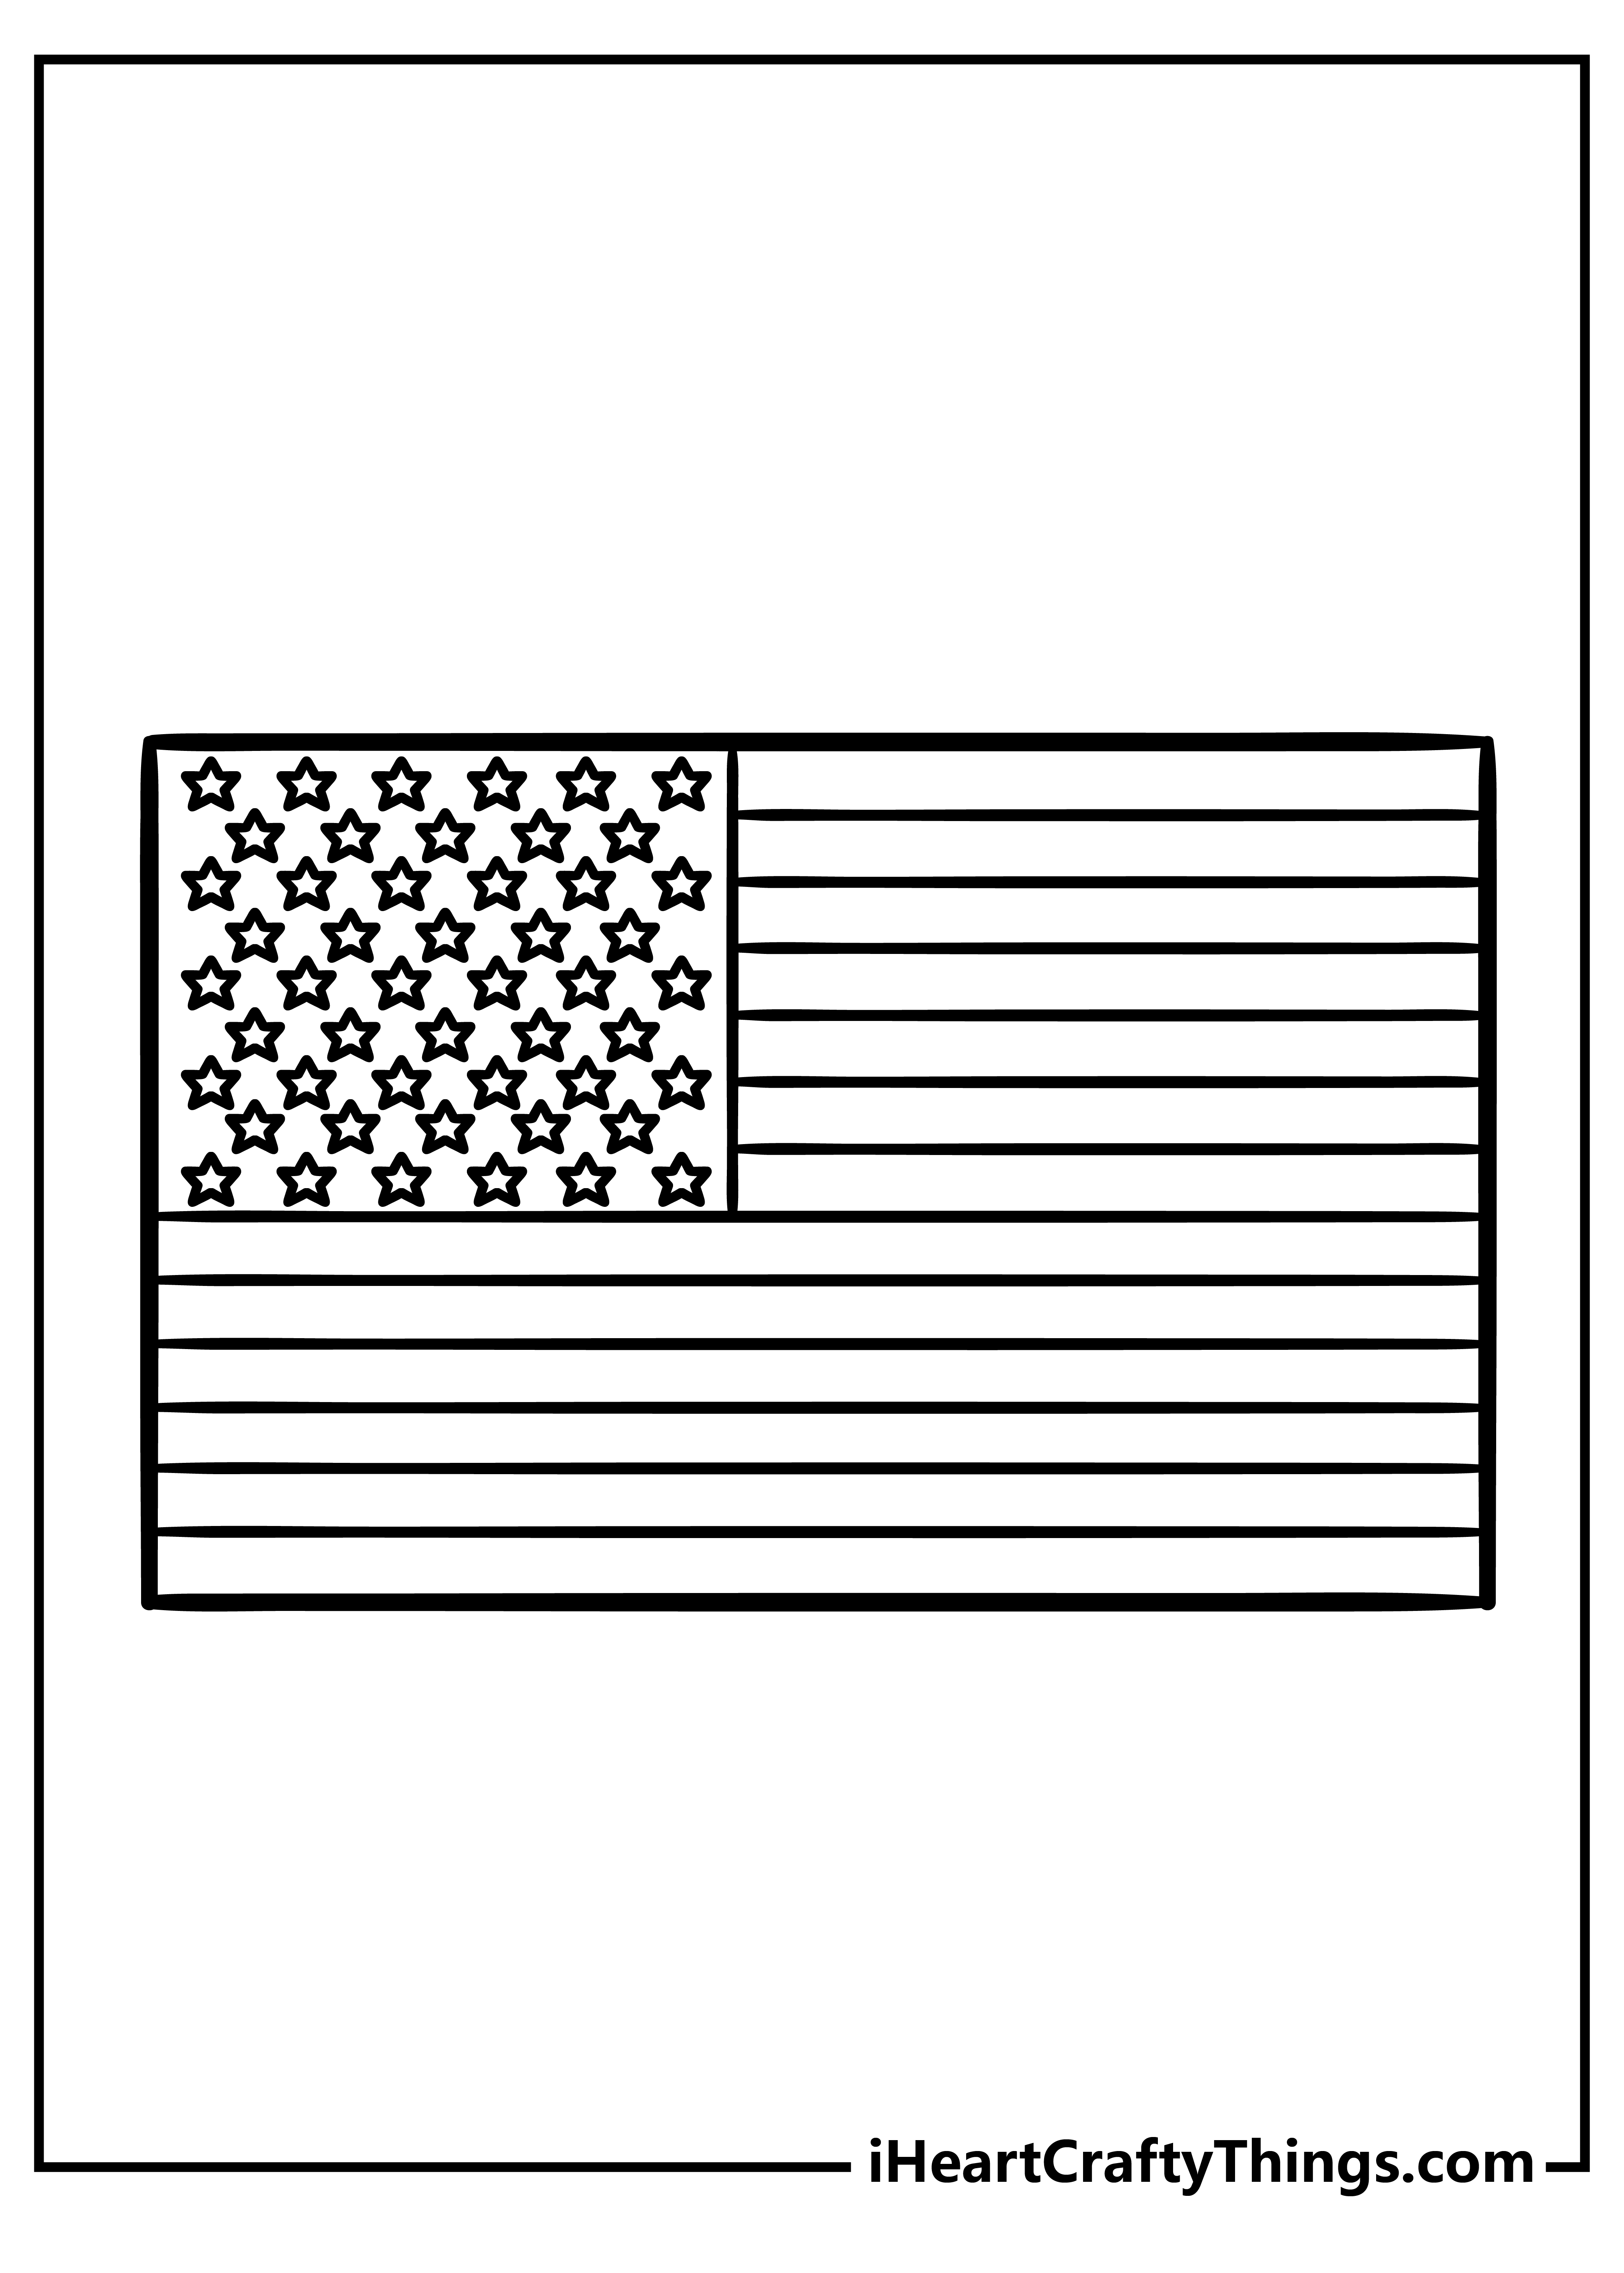 American flag coloring pages free printables